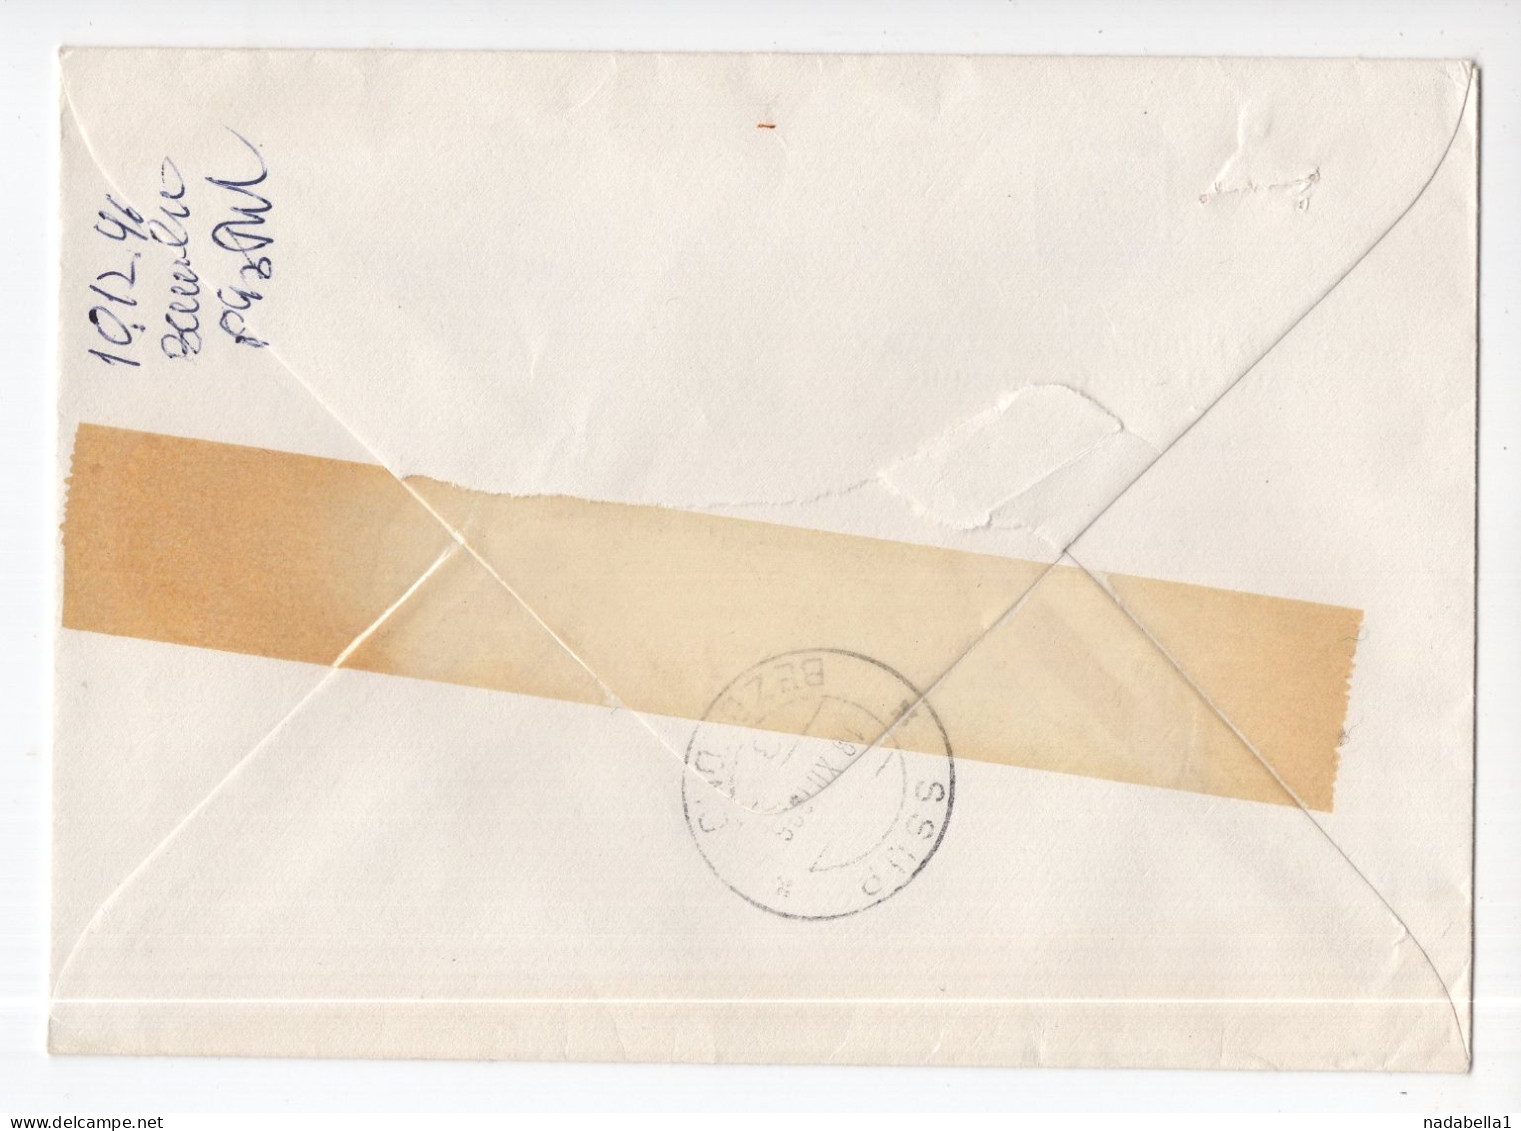 1996. YUGOSLAVIA,SERBIA,BELGRADE,AR RECORDED COVER,RETURNED,NOT COLLECTED,SCIENCE MINISTRY HEADED COVER - Storia Postale